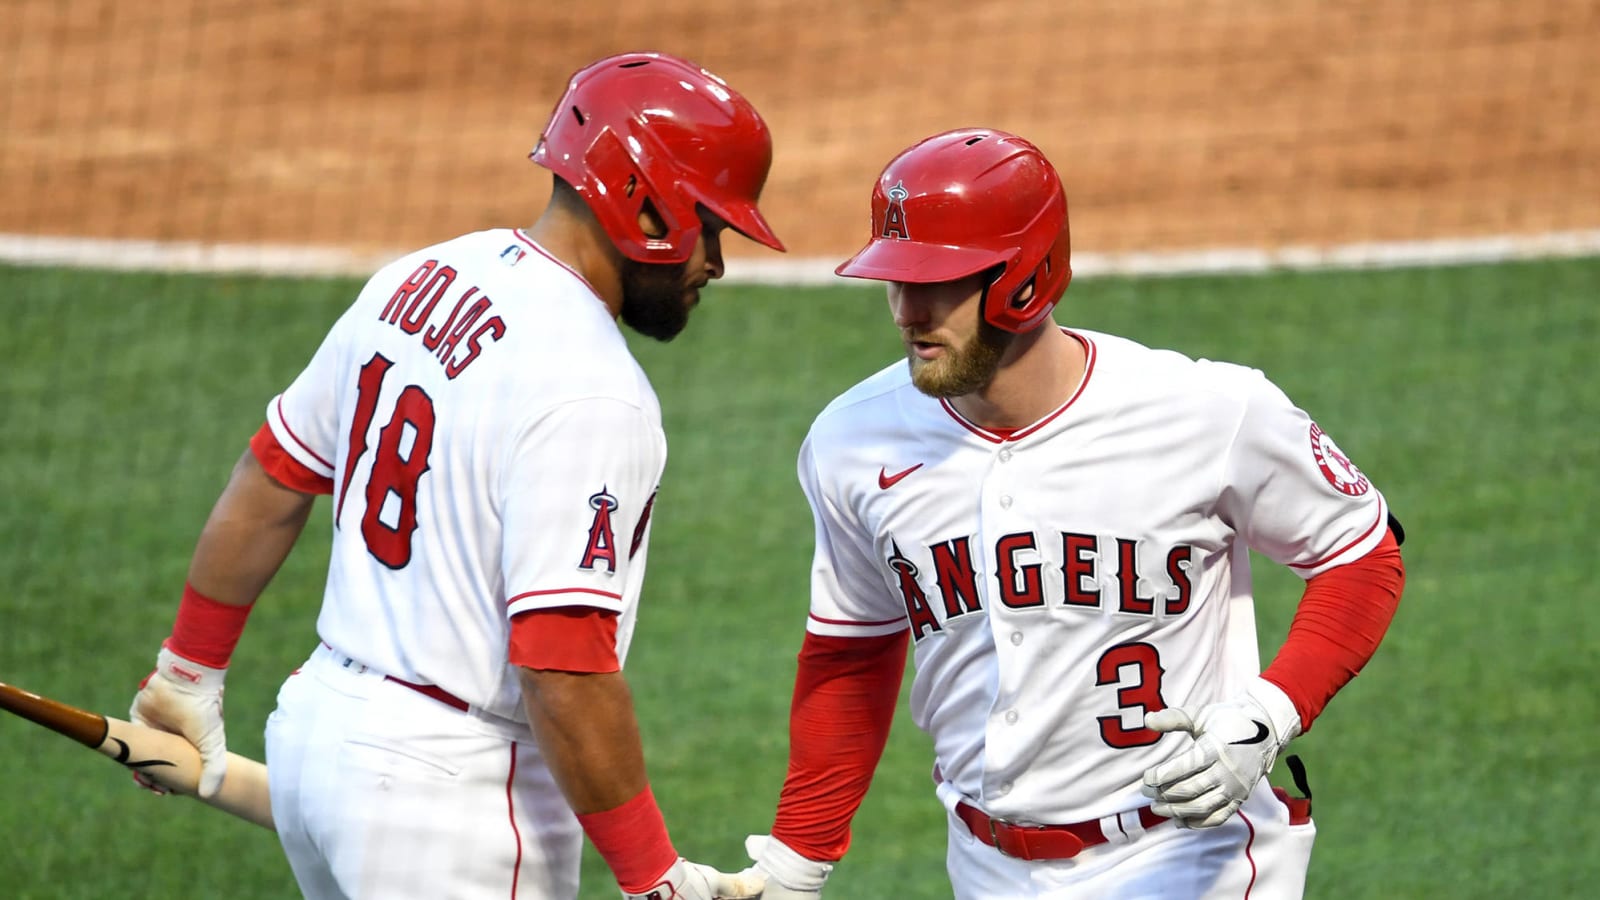 Dodgers were baffled by this play by Angels in Saturday’s game